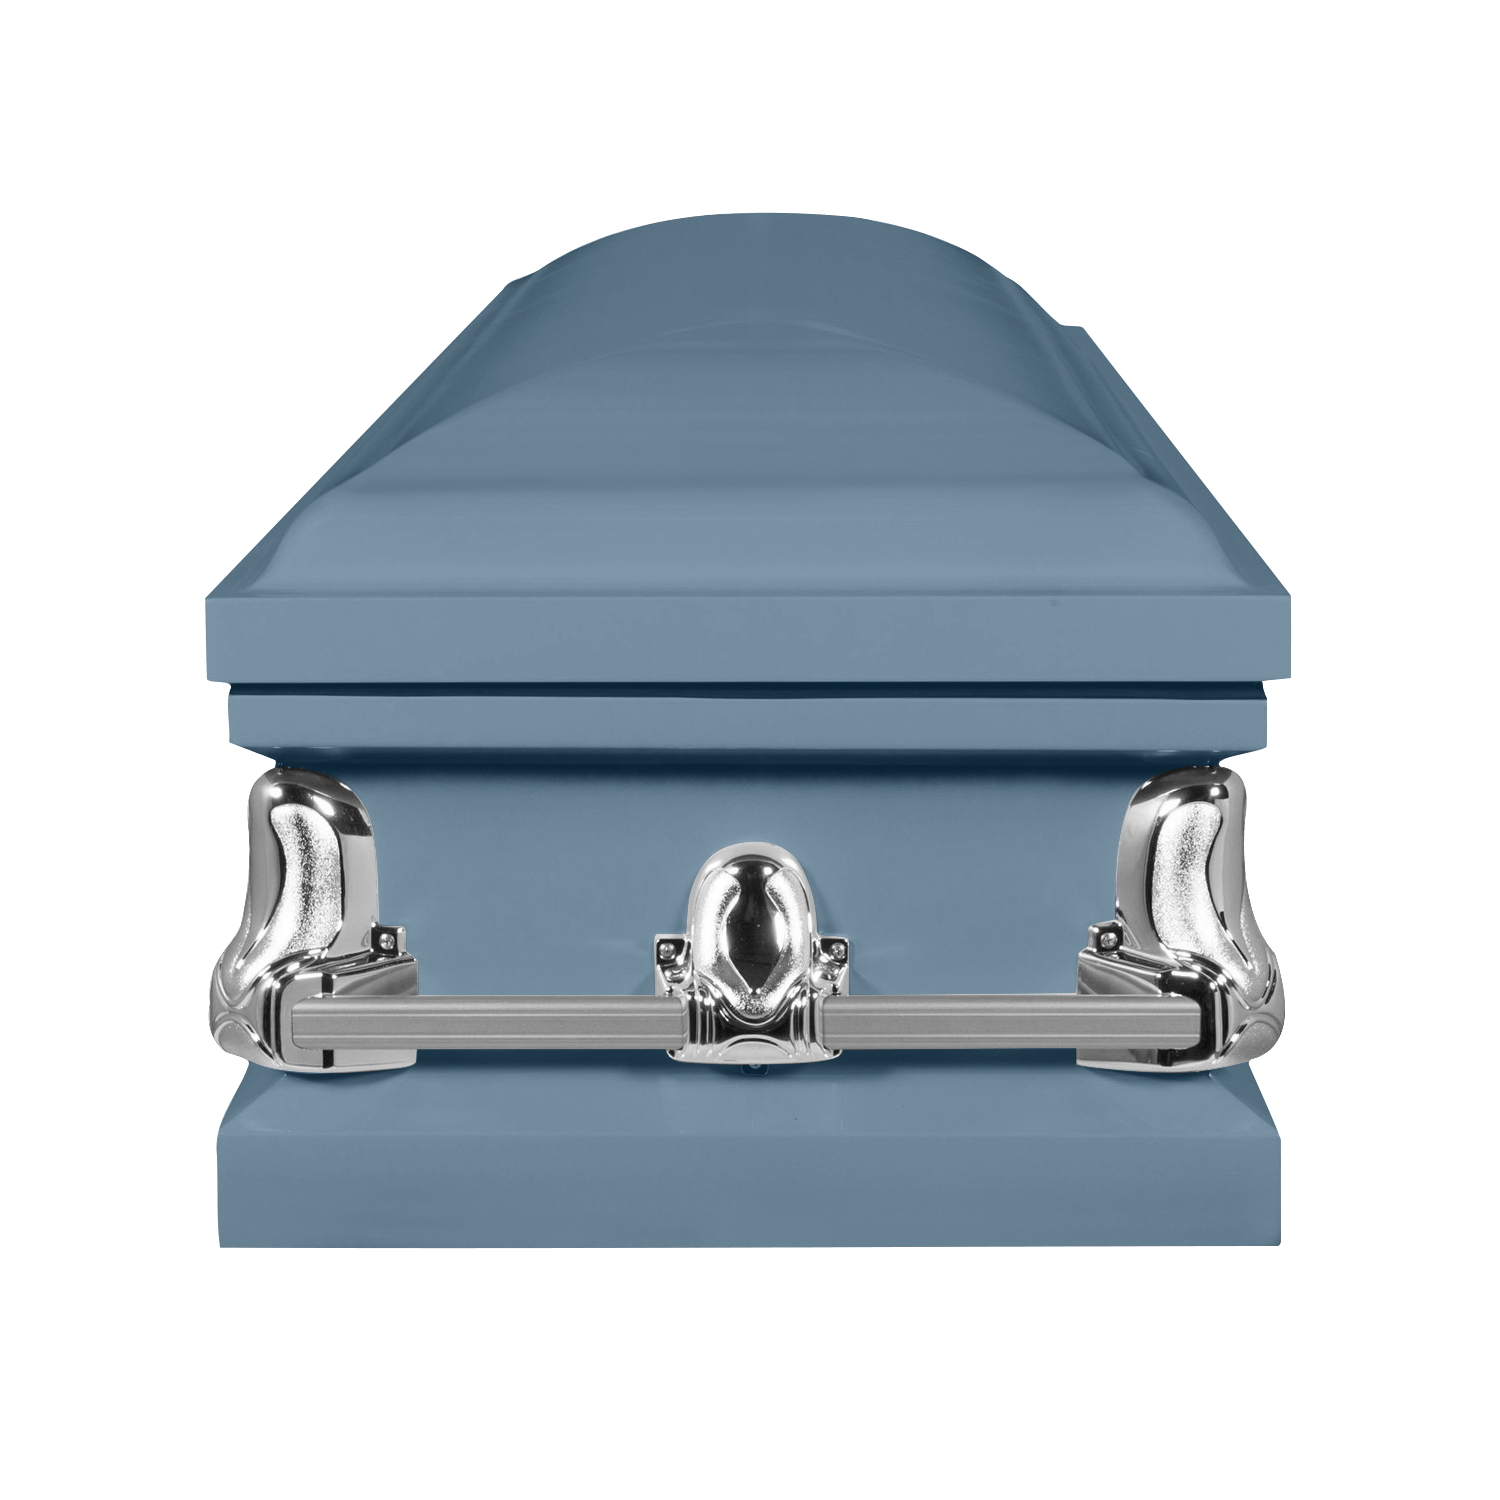 Load image into Gallery viewer, Full Couch Orion Series | Light Blue Steel Casket with Light Blue Interior
